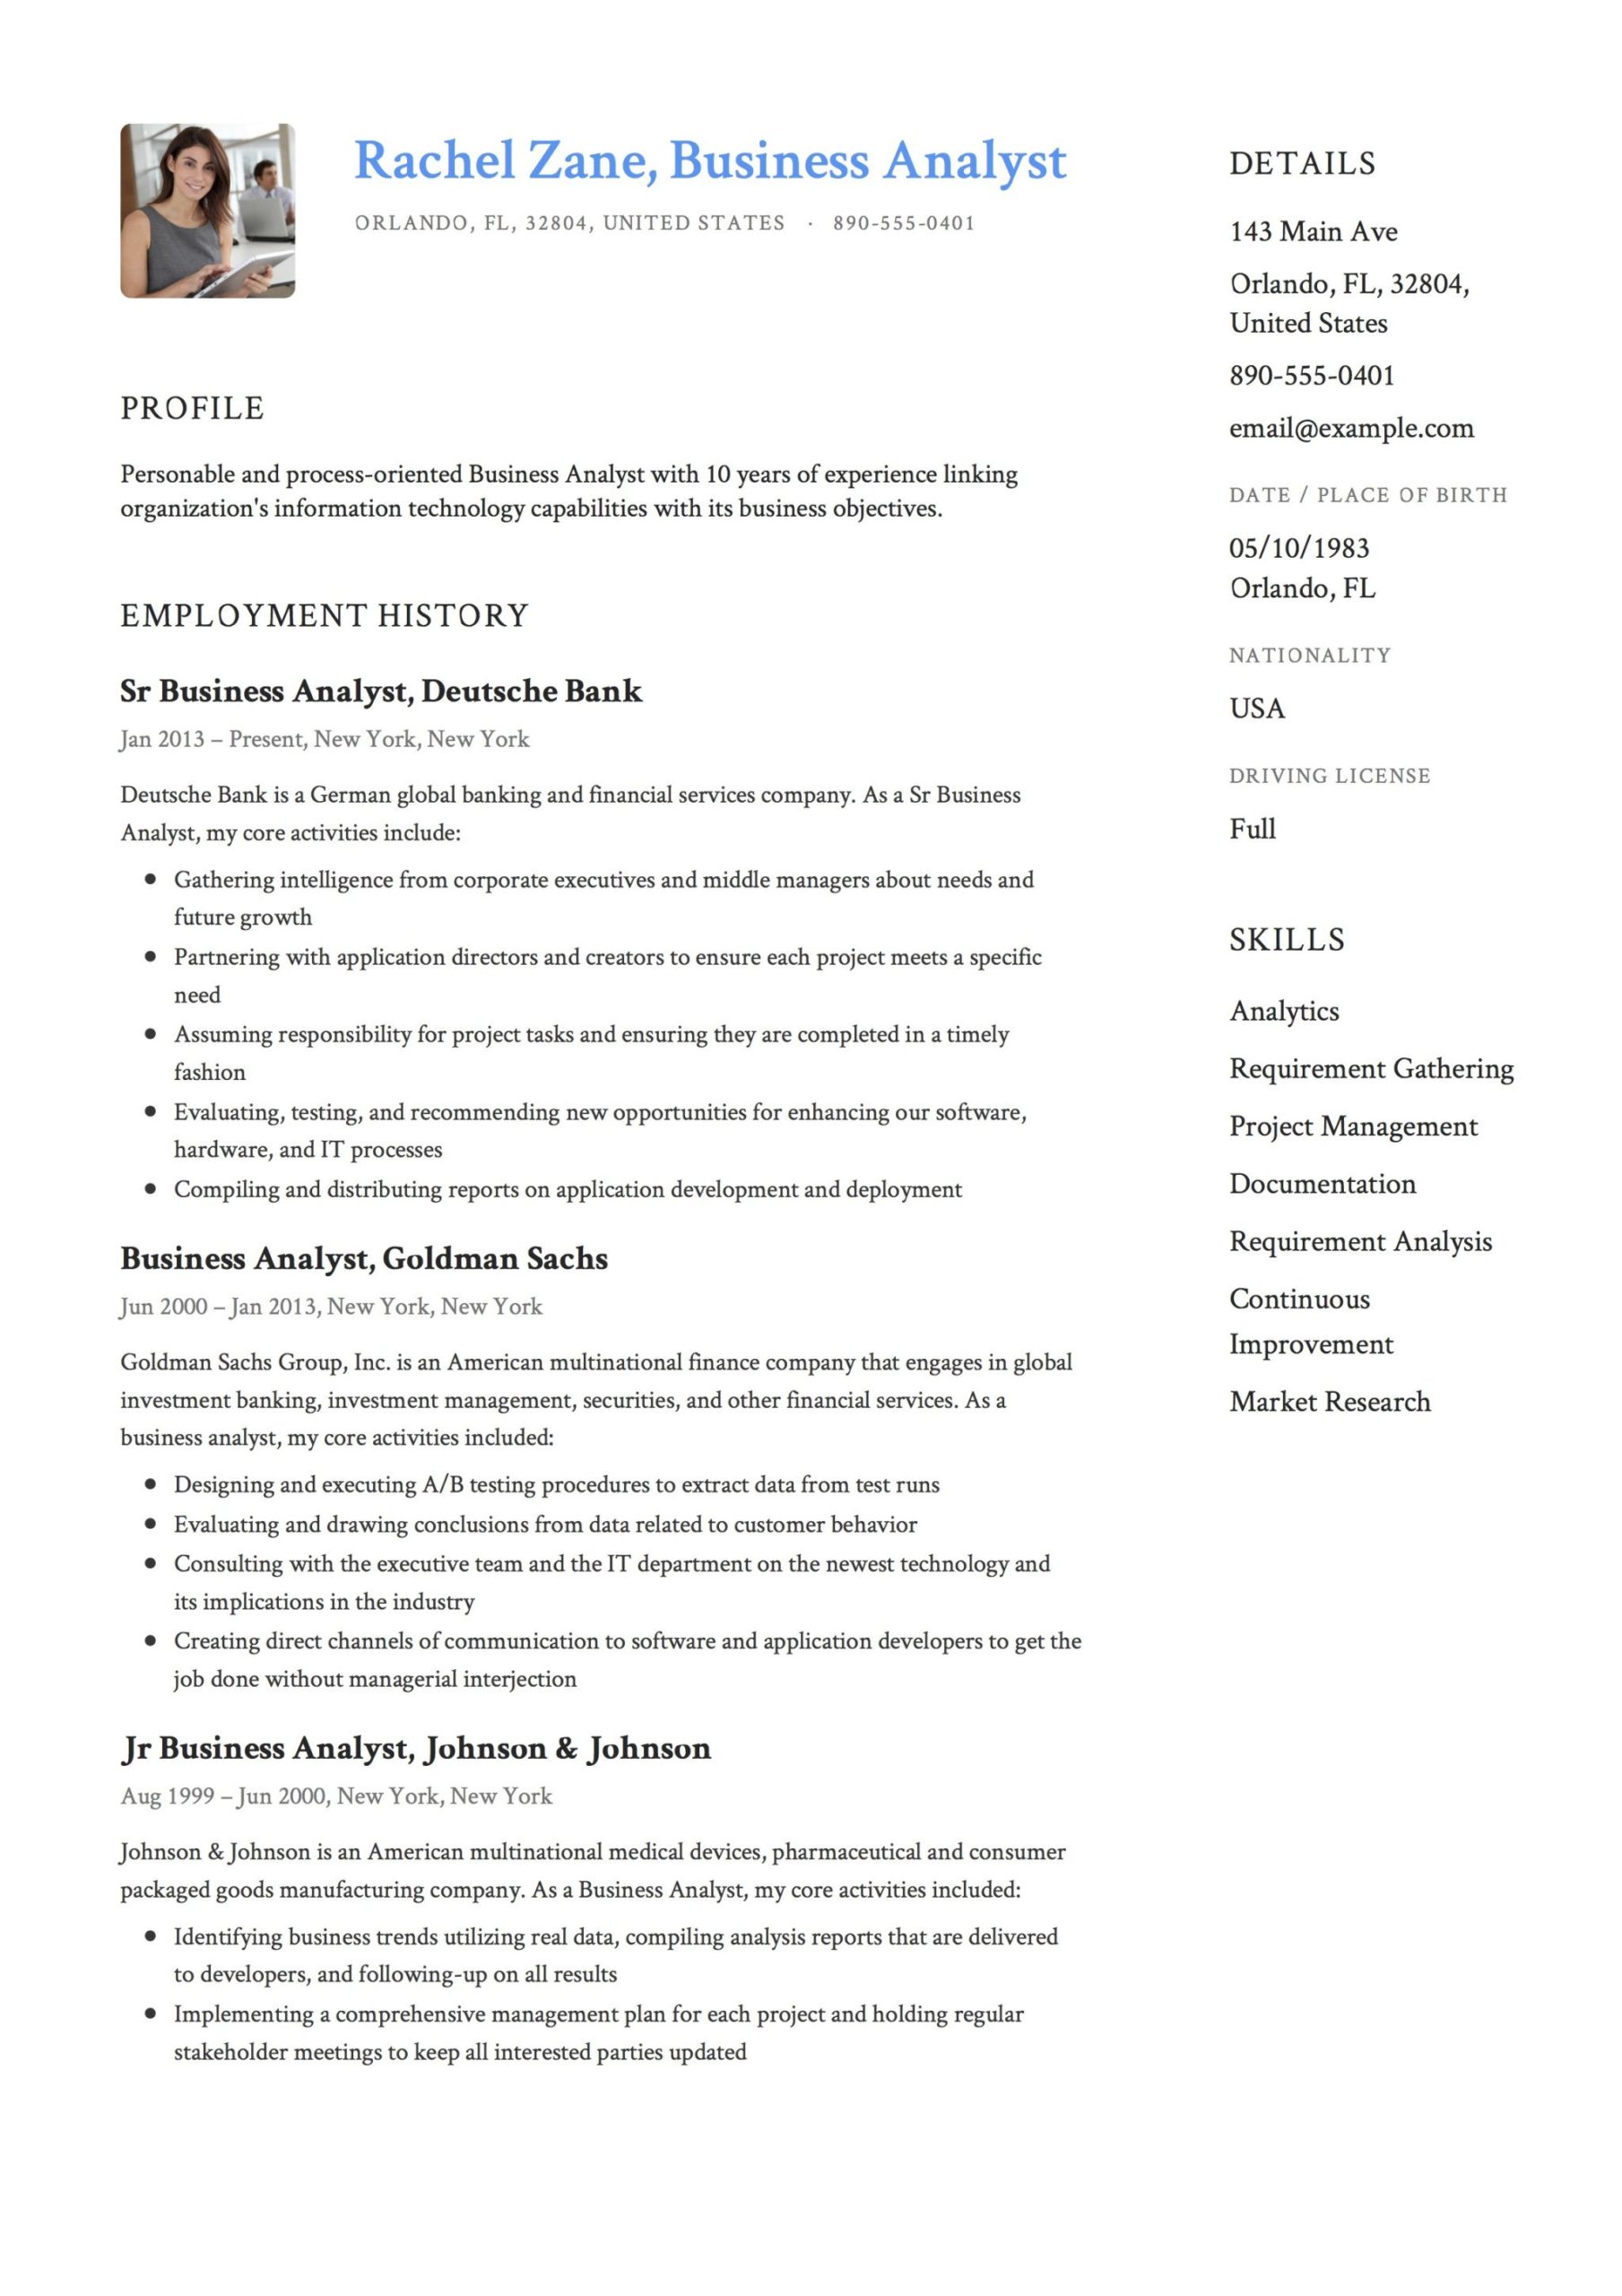 Sample Resume for Banking Business Analyst Business Analyst Resume Examples & Writing Guide 2022